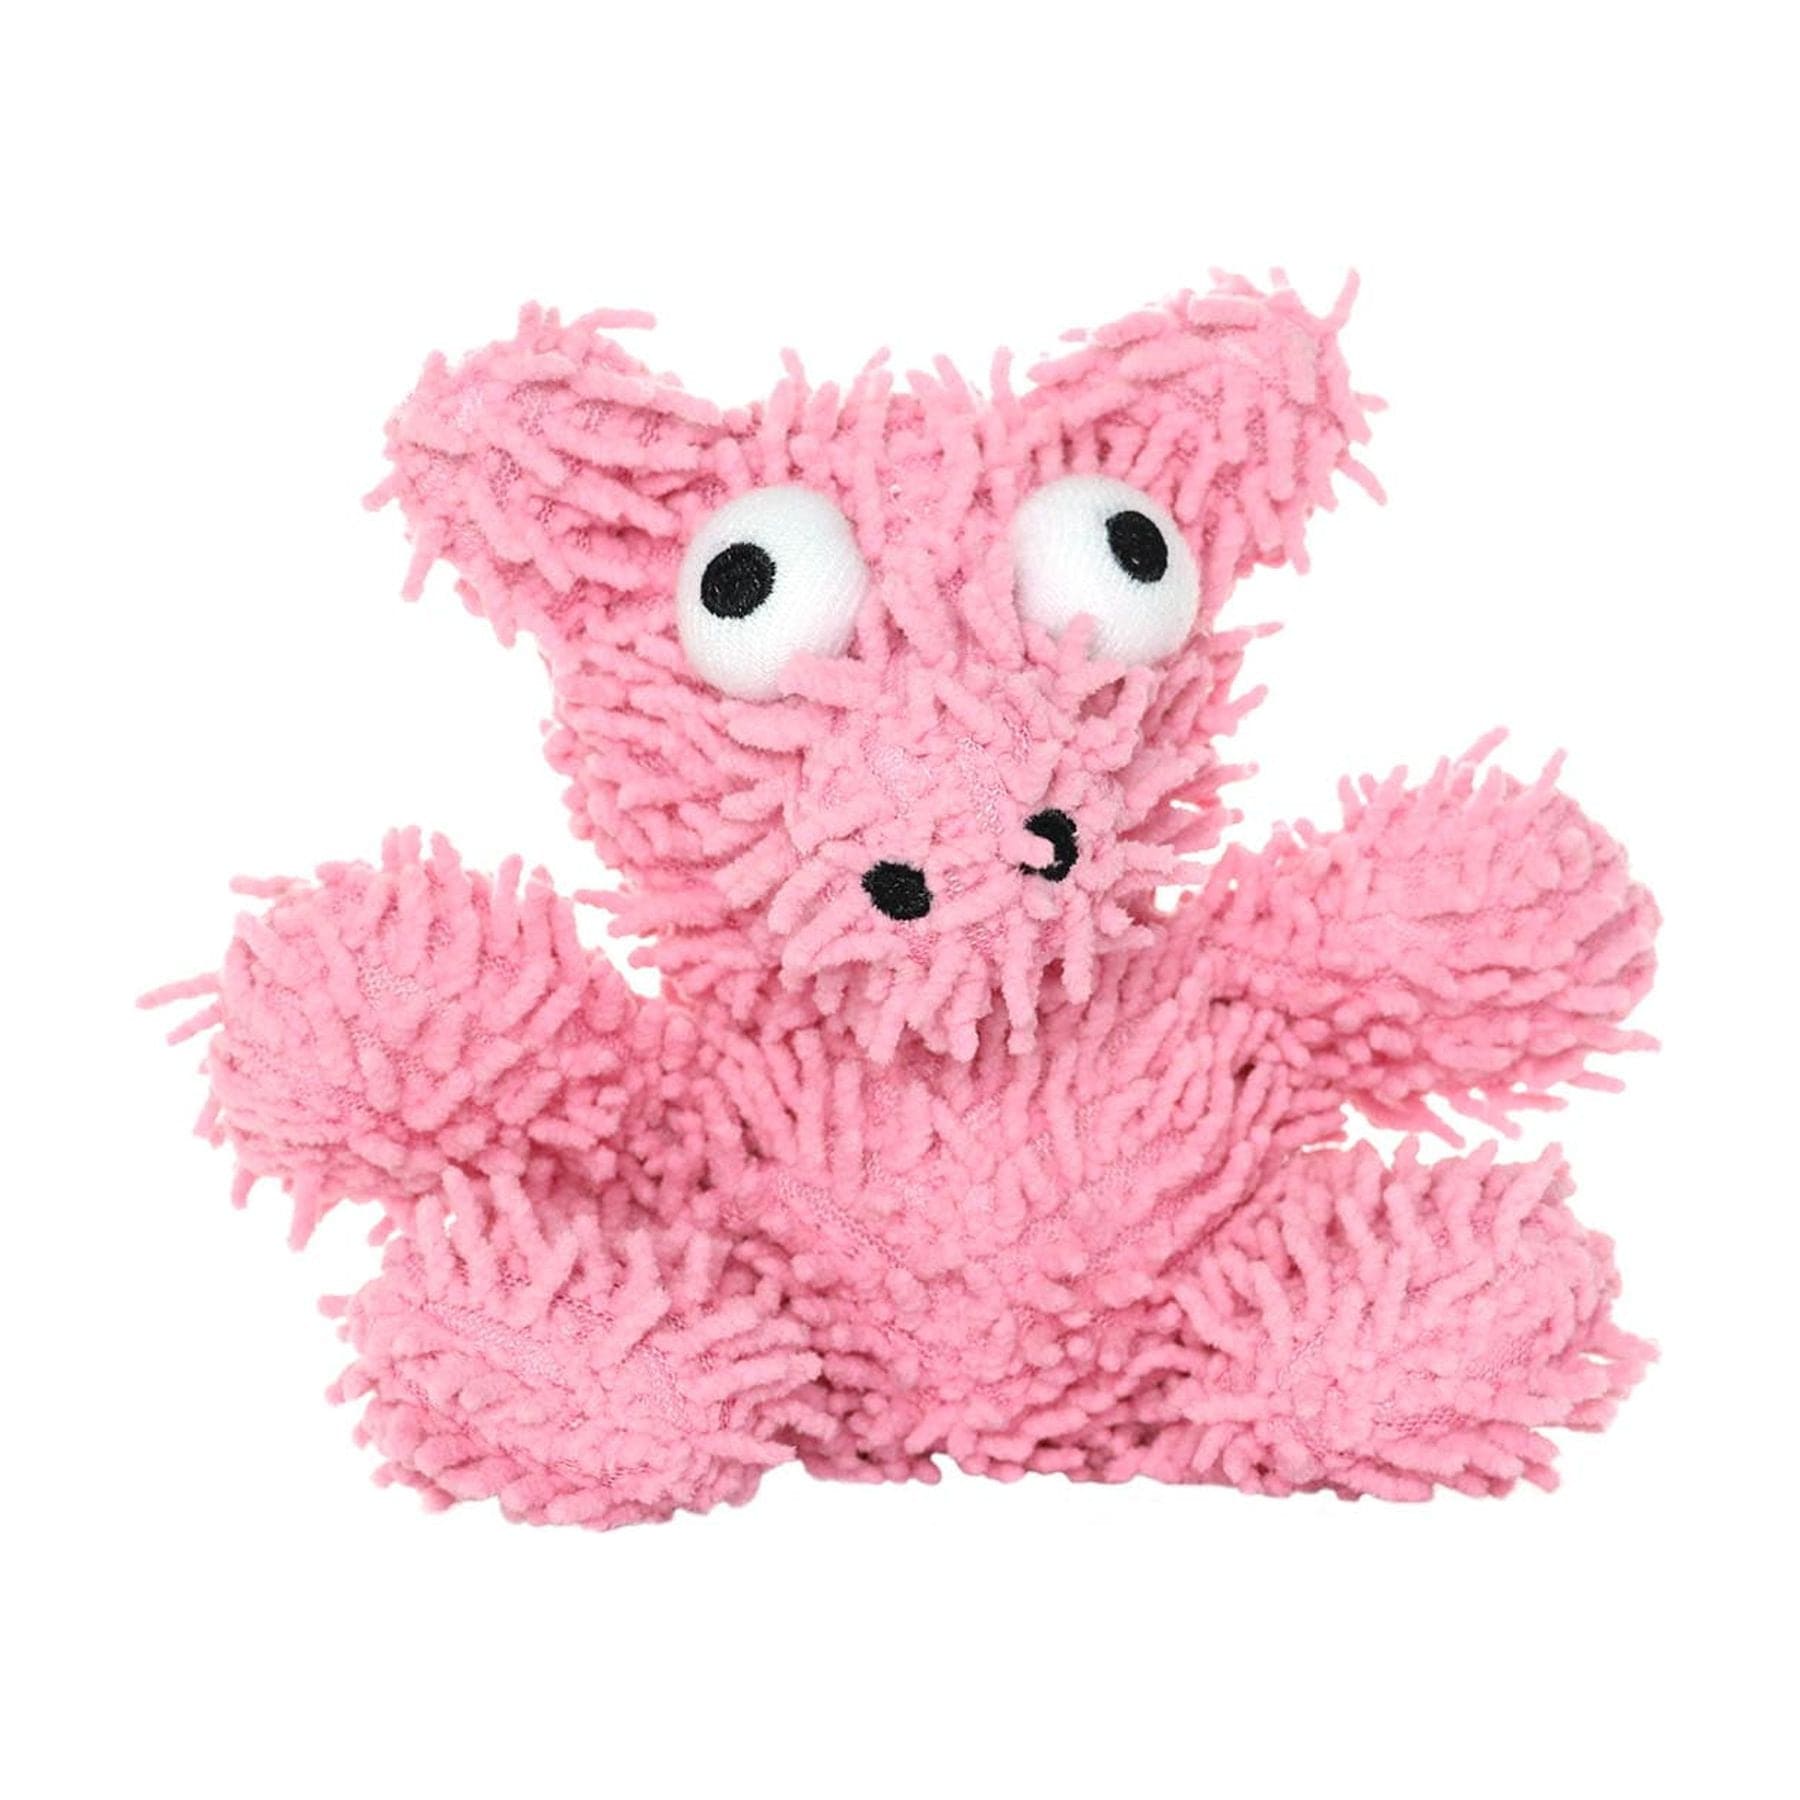 Mighty Microfiber Ball Pig, Squeaky Dog Toy and Jr Pig